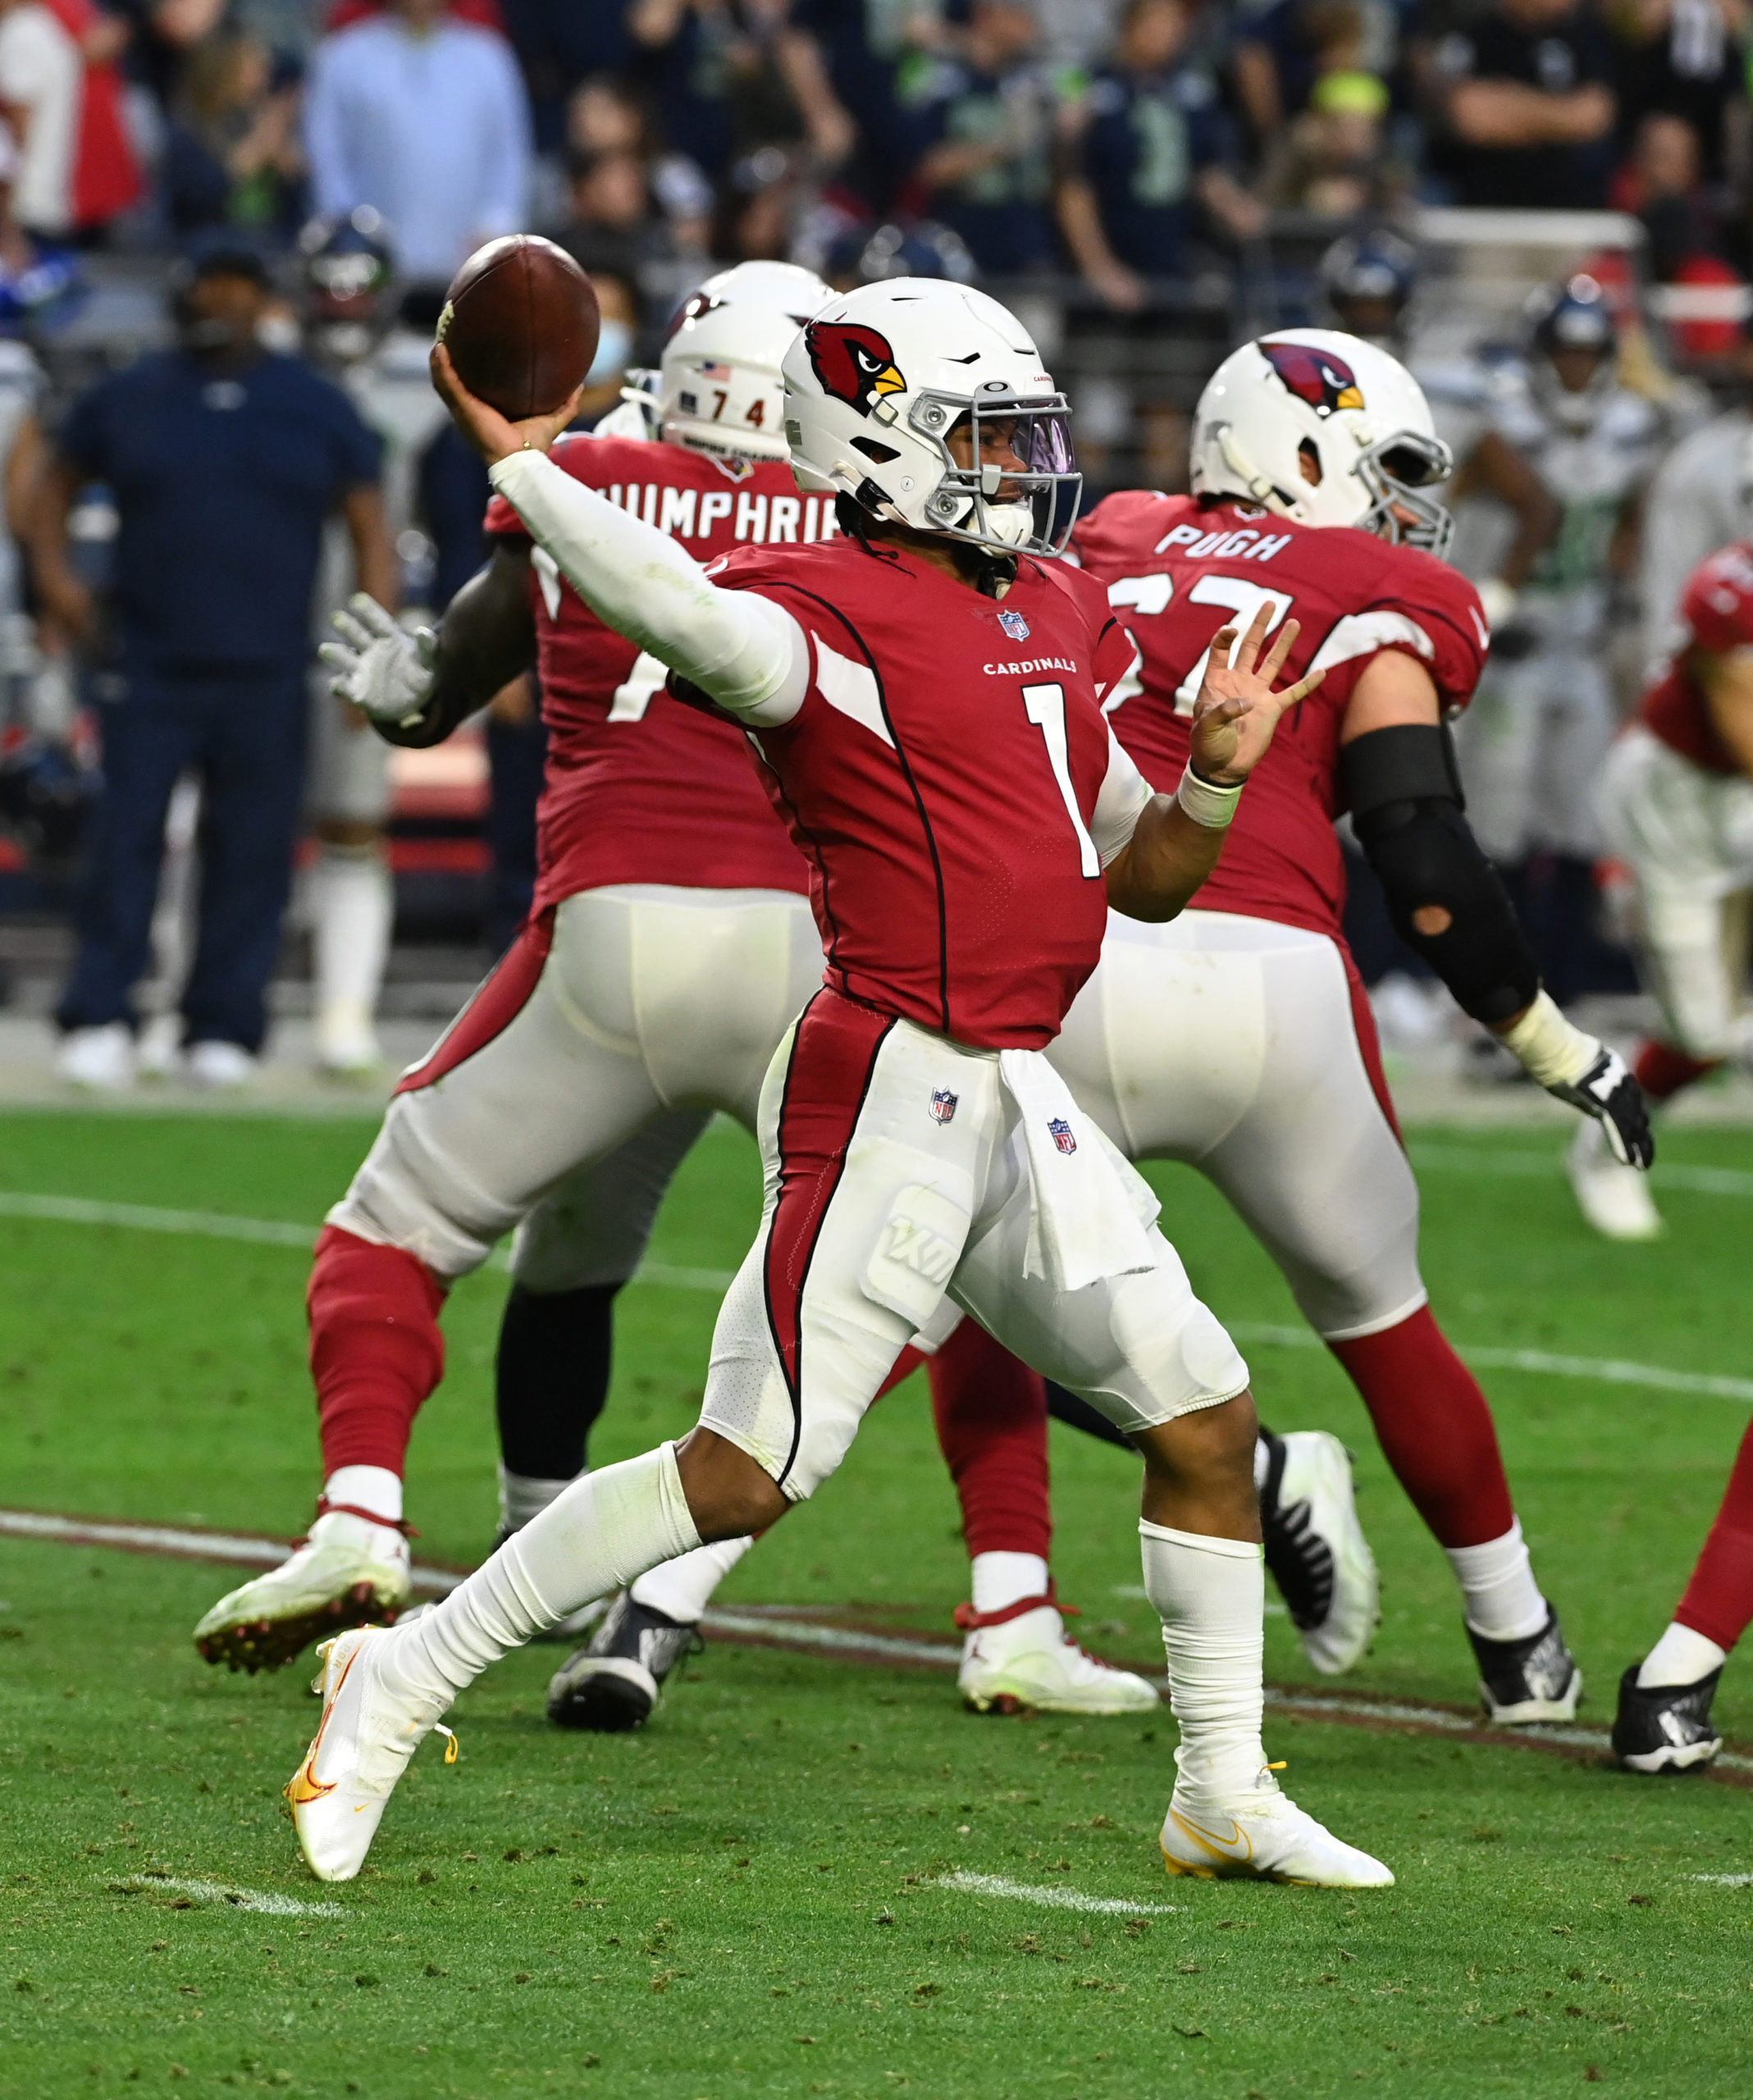 GLENDALE, ARIZONA - JANUARY 09: Kyler Murray #1 of the Arizona Cardinals throws the ball against the Seattle Seahawks at State Farm Stadium on January 09, 2022 in Glendale, Arizona. (Photo by Norm Hall/Getty Images)